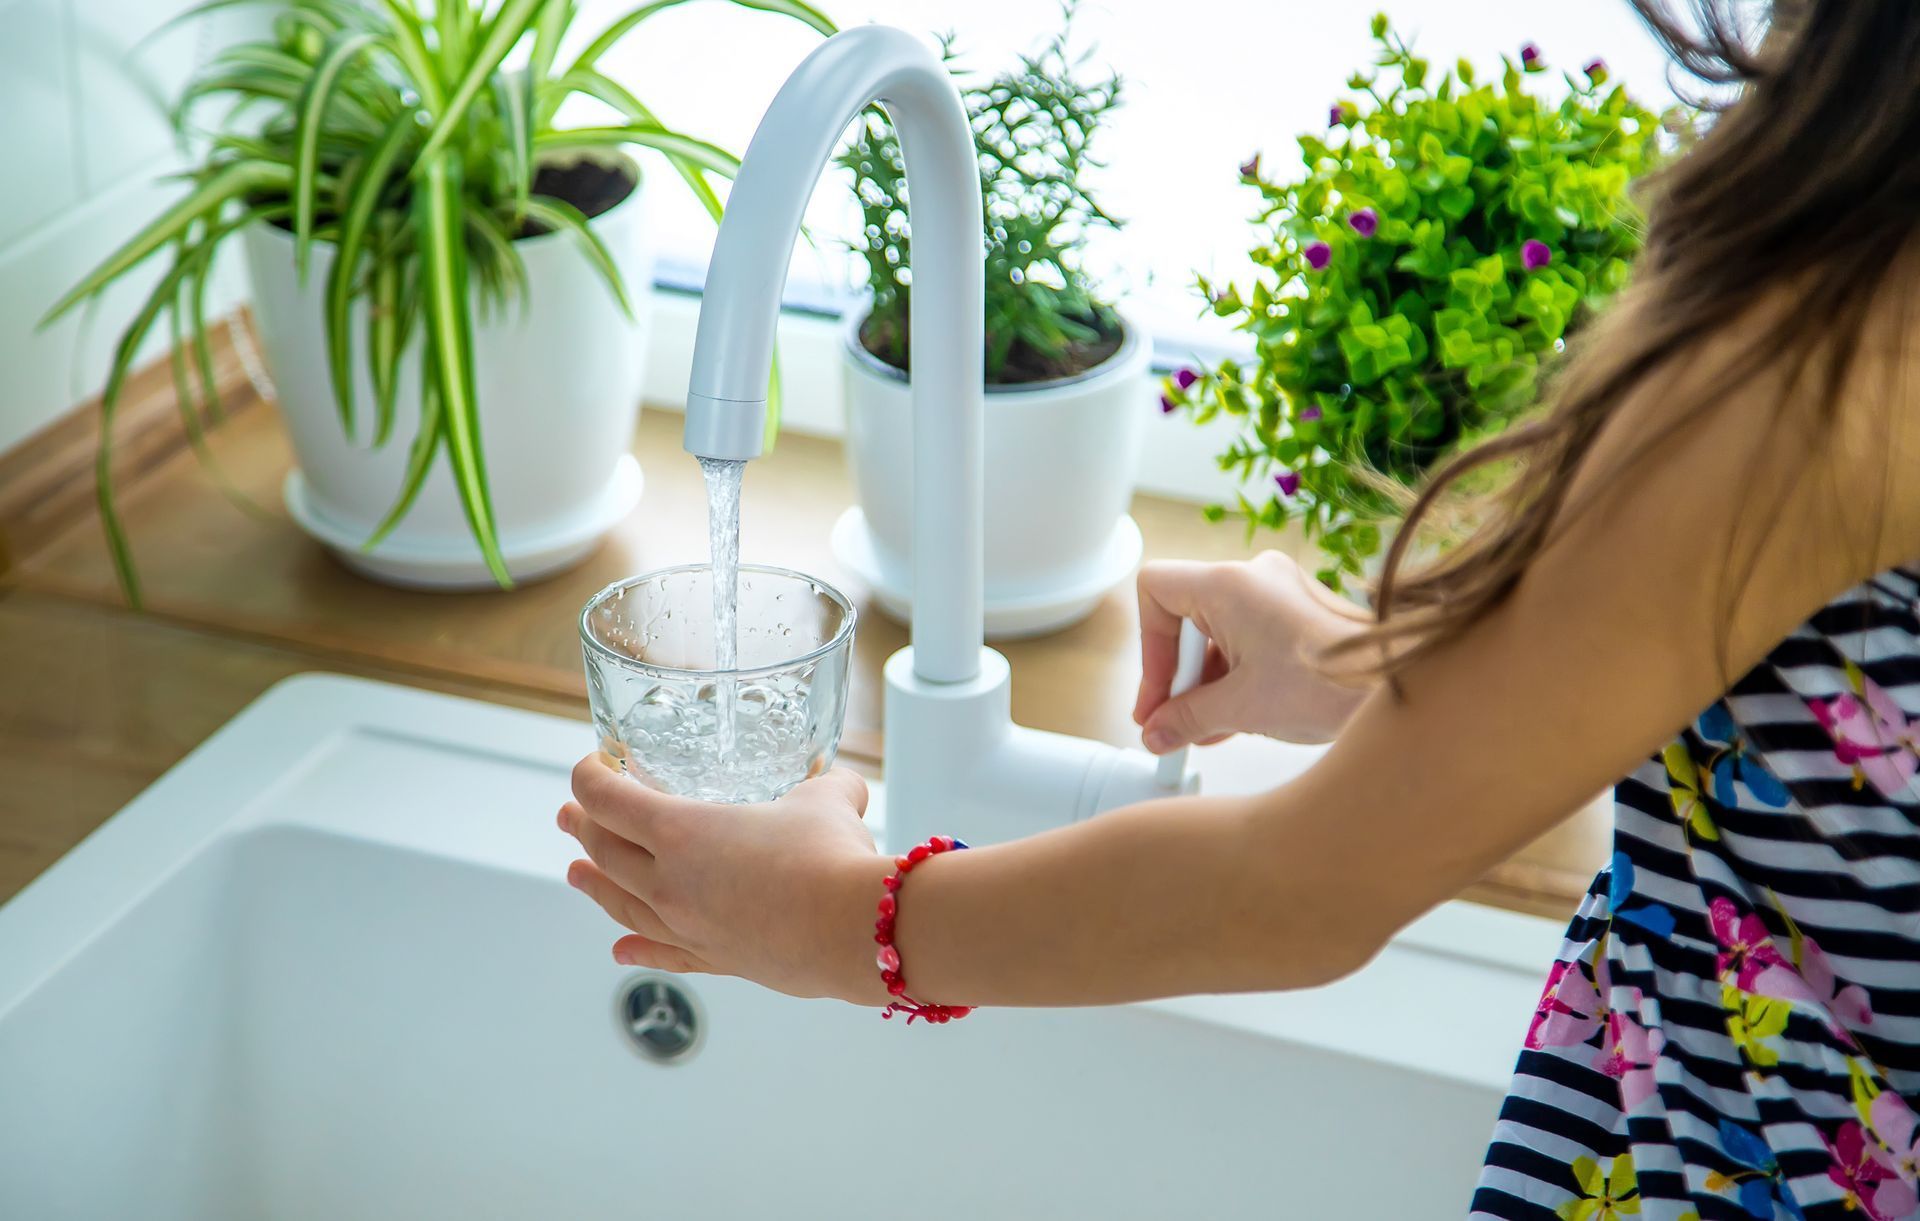 Water Filtration Systems